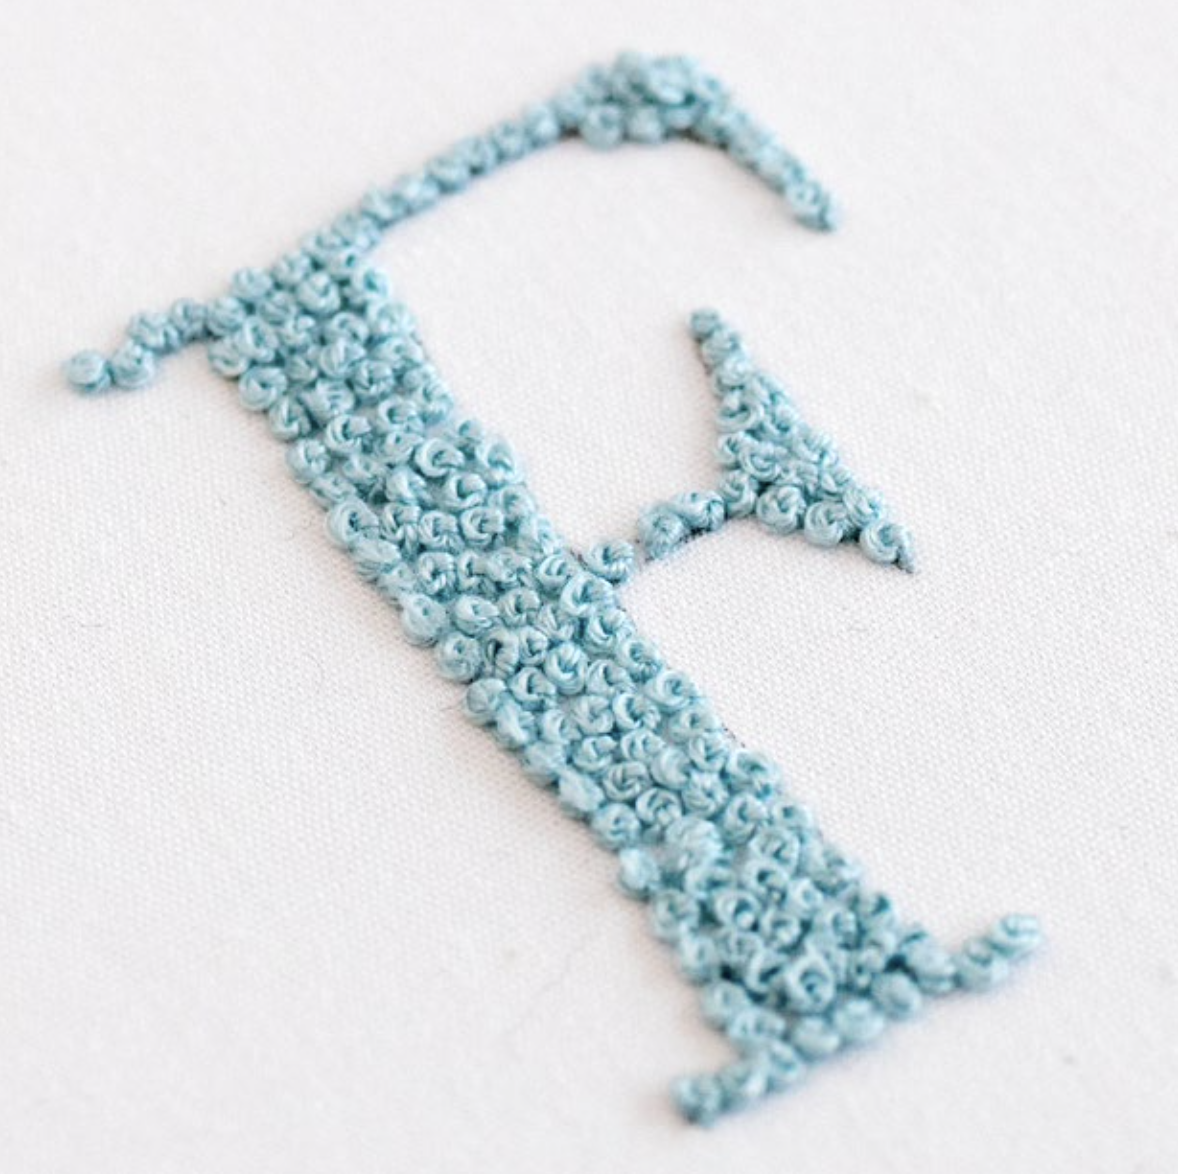 The letter F is stitched using french knots.